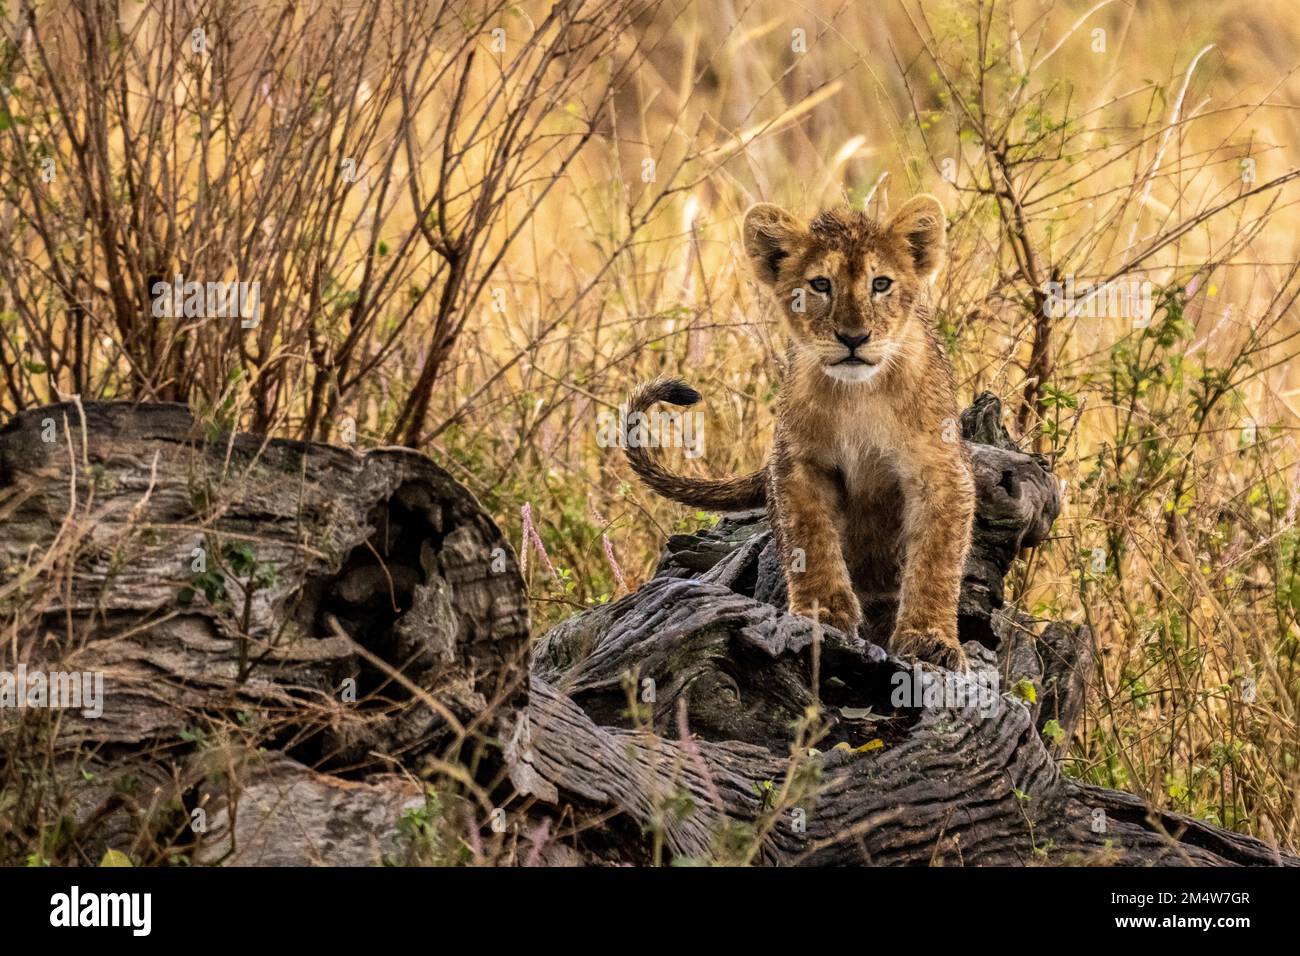 Lion cubs playing. Photographed in Tanzania in August Stock Photo